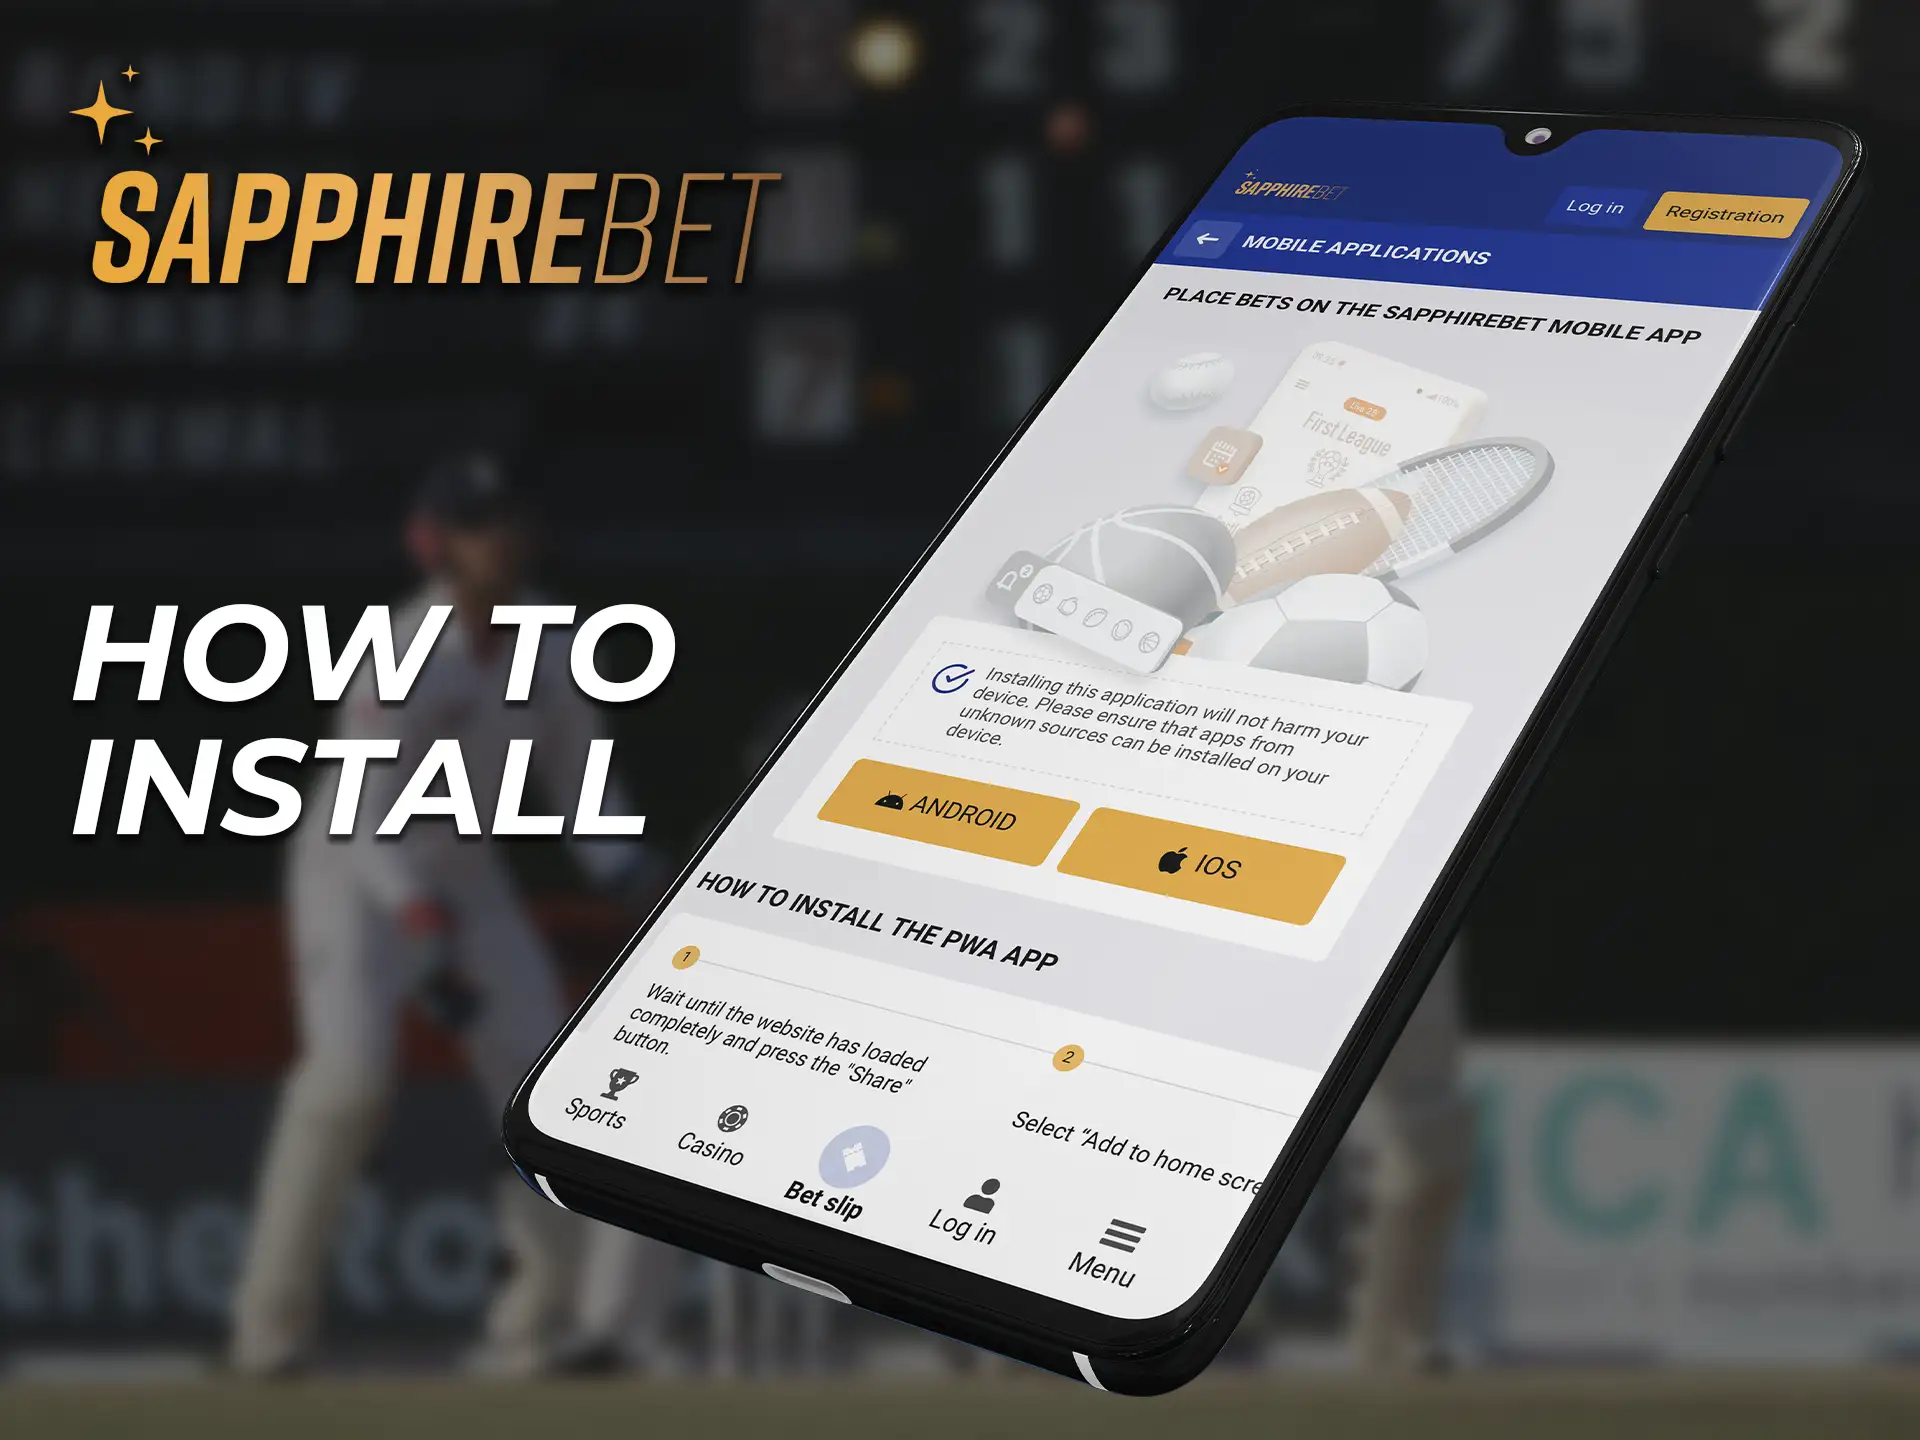 Use the instructions to install the SapphireBet app.